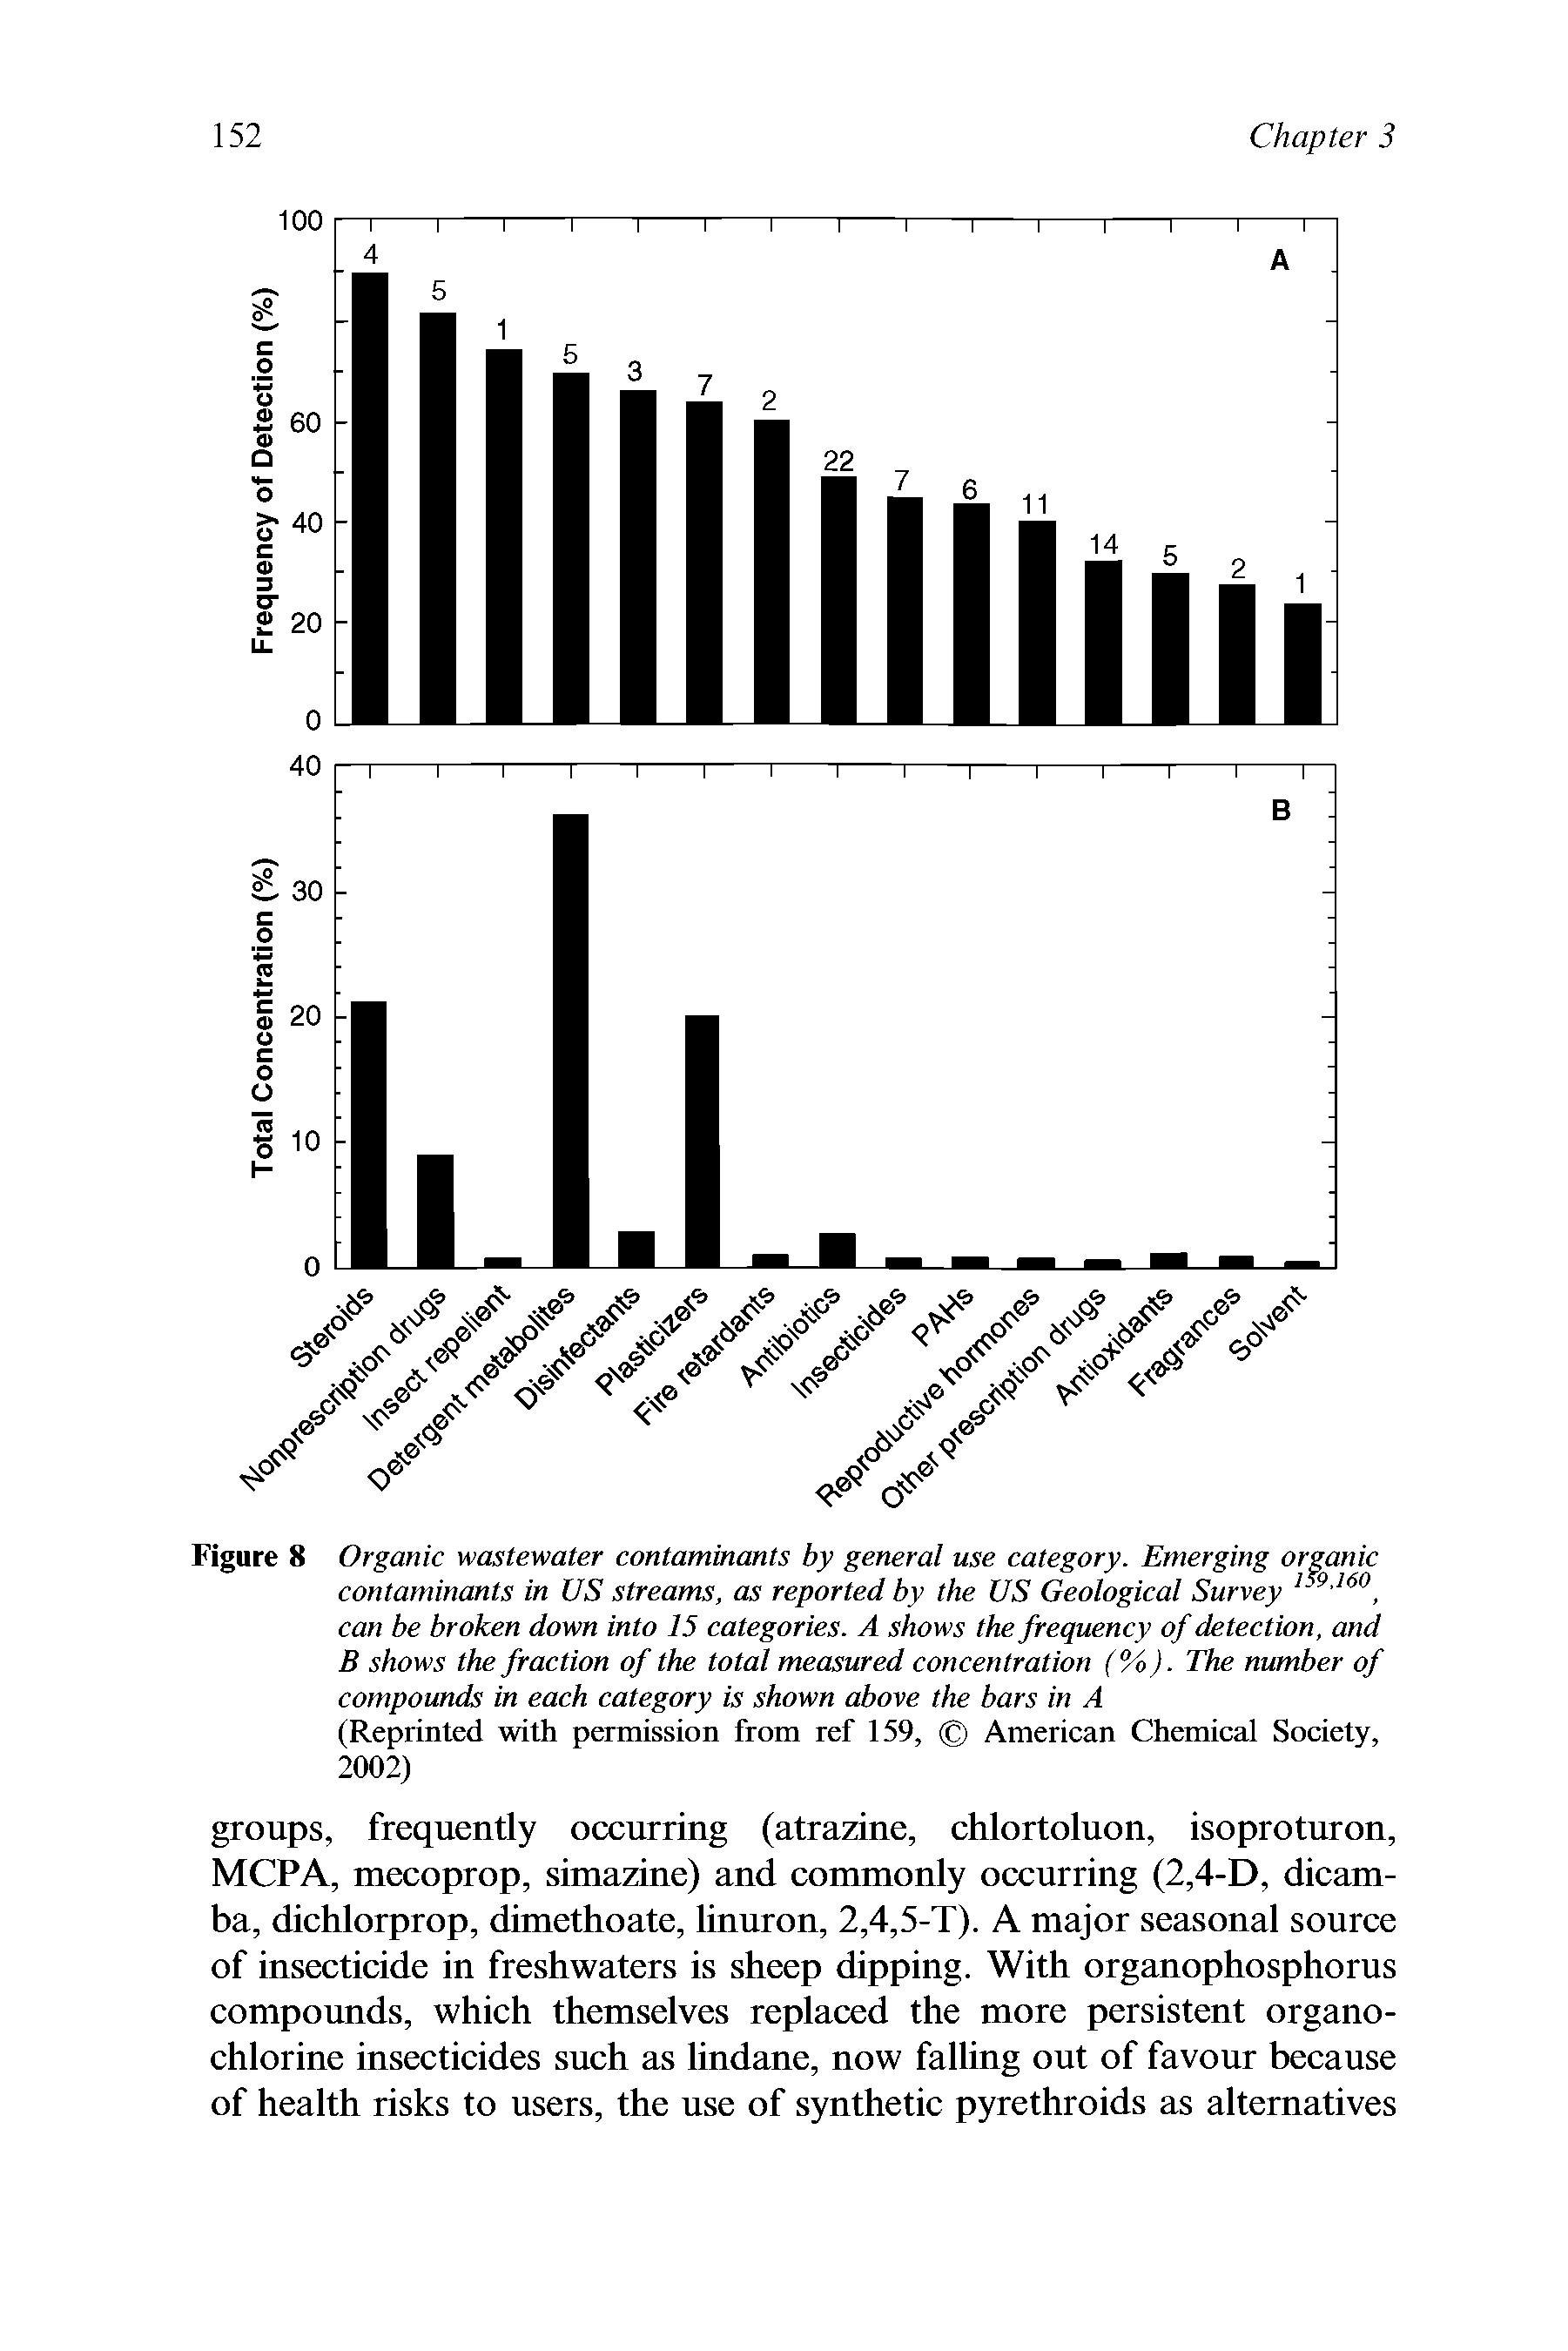 Figure 8 Organic wastewater contaminants by general use category. Emerging organic contaminants in US streams, as reported by the US Geological Survey can be broken down into 15 categories. A shows the frequency of detection, and B shows the fraction of the total measured concentration (%). The number of compounds in each category is shown above the bars in A (Reprinted with permission from ref 159, American Chemical Society, 2002)...